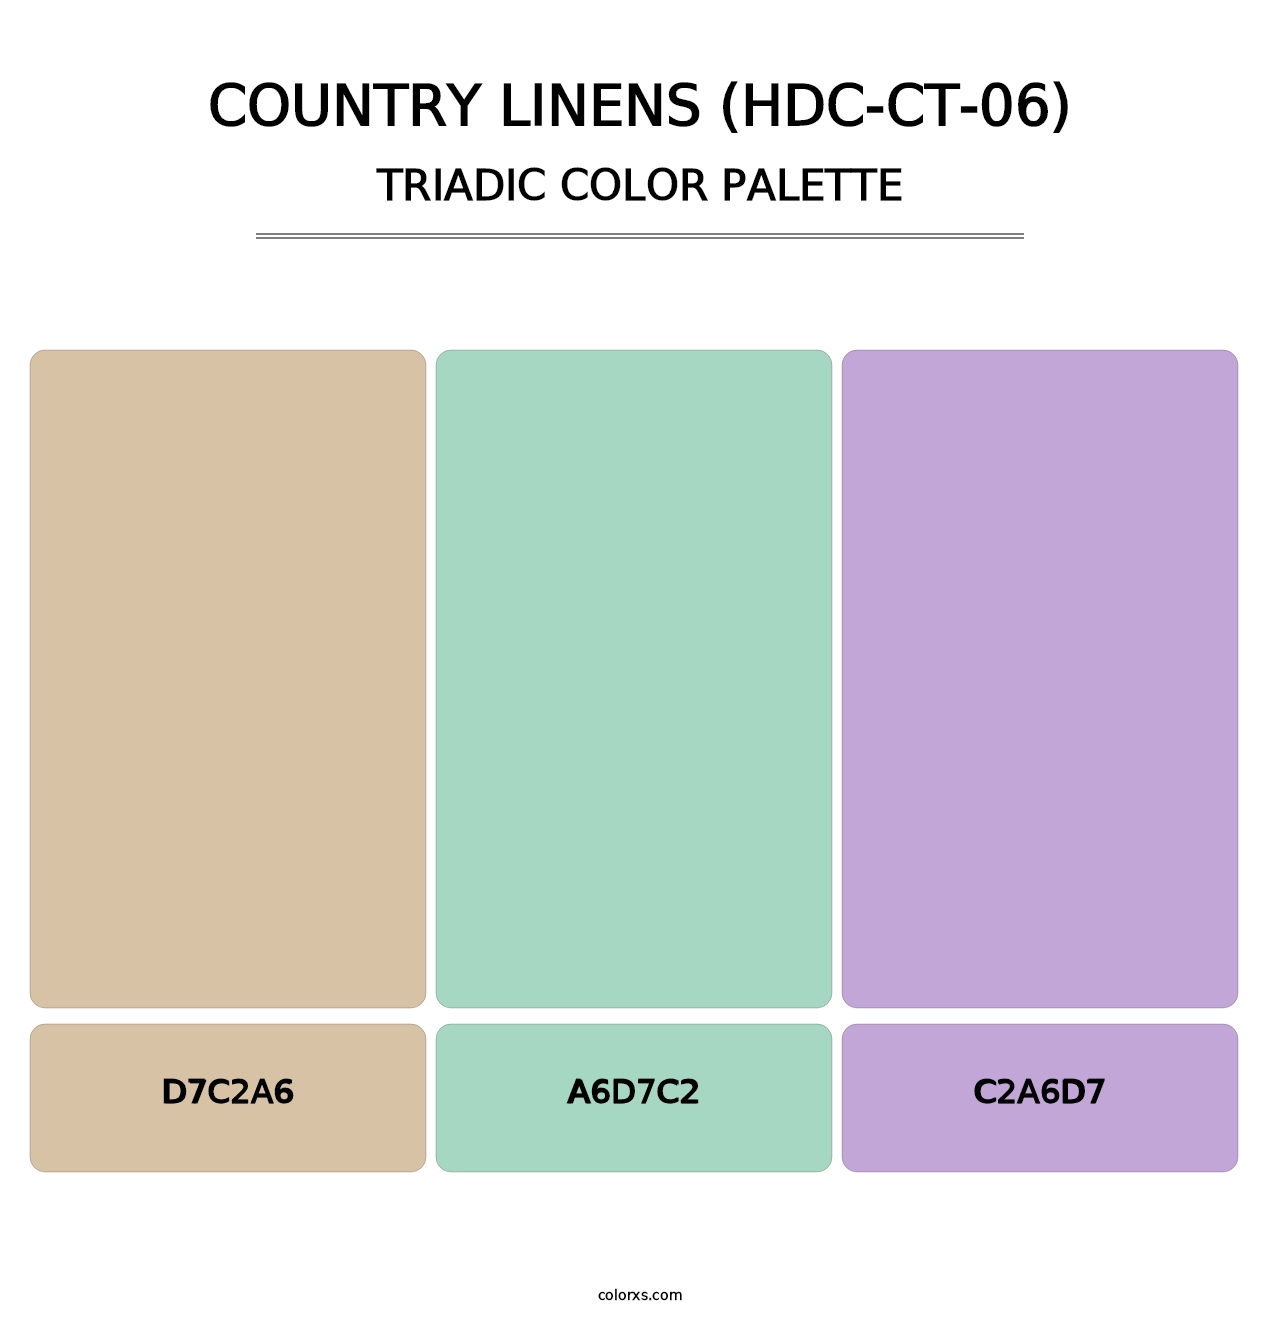 Country Linens (HDC-CT-06) - Triadic Color Palette